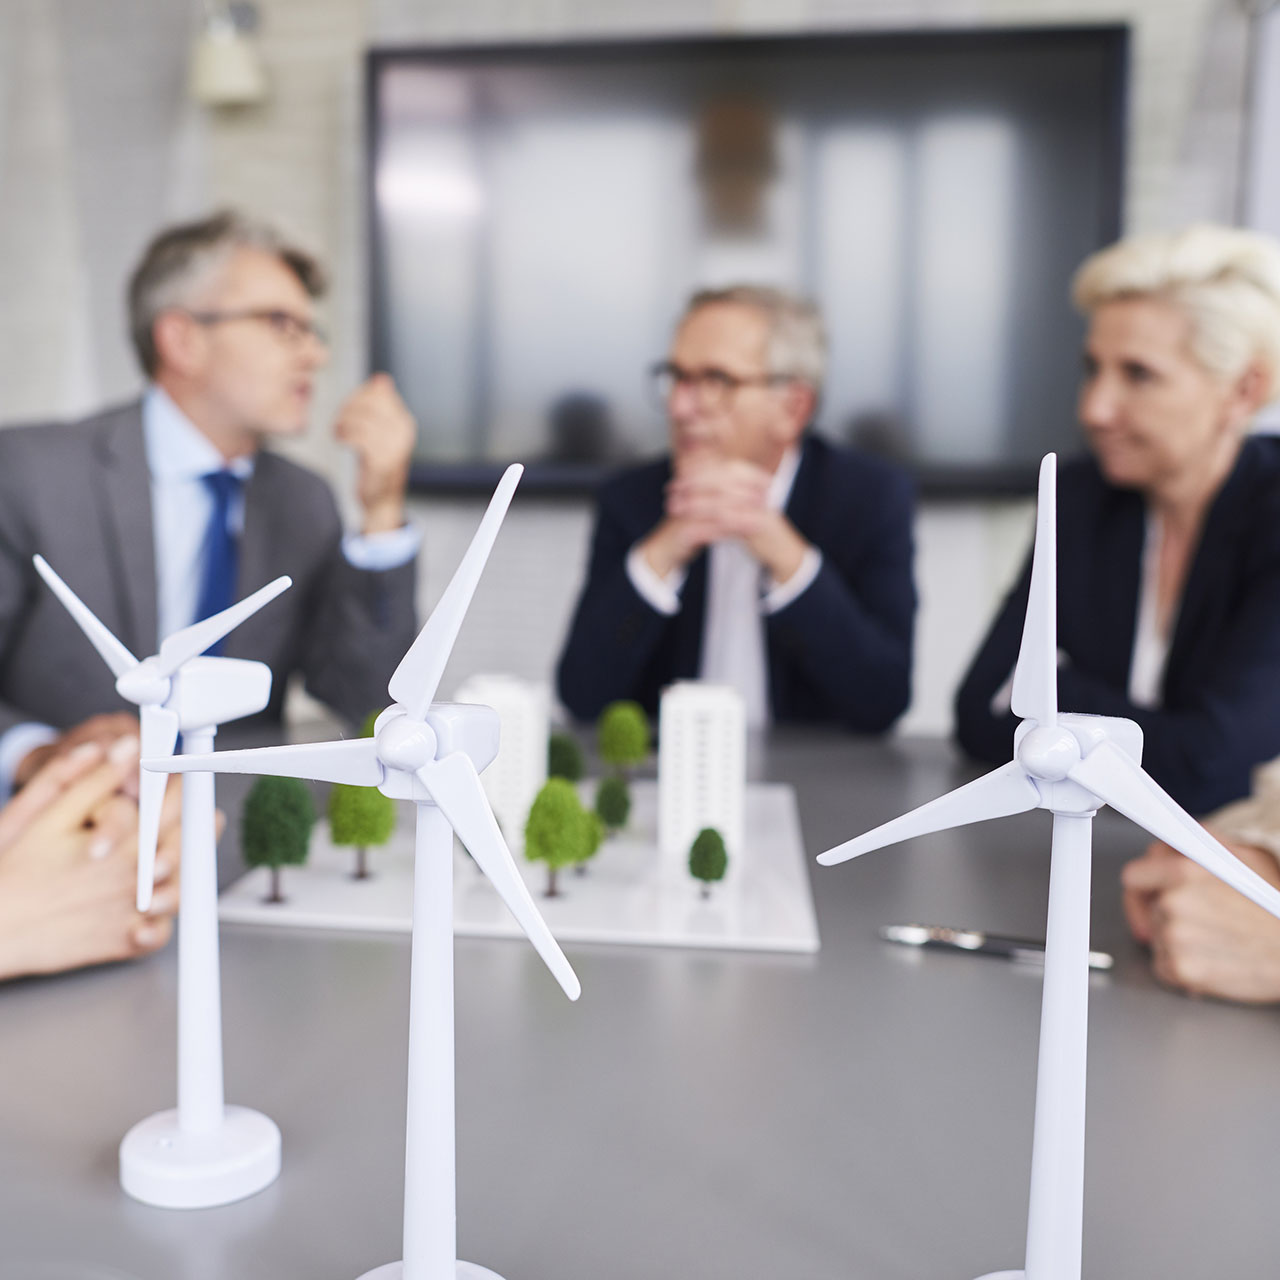 When Do Appointments of Corporate Sustainability Executives Affect Shareholder Value?